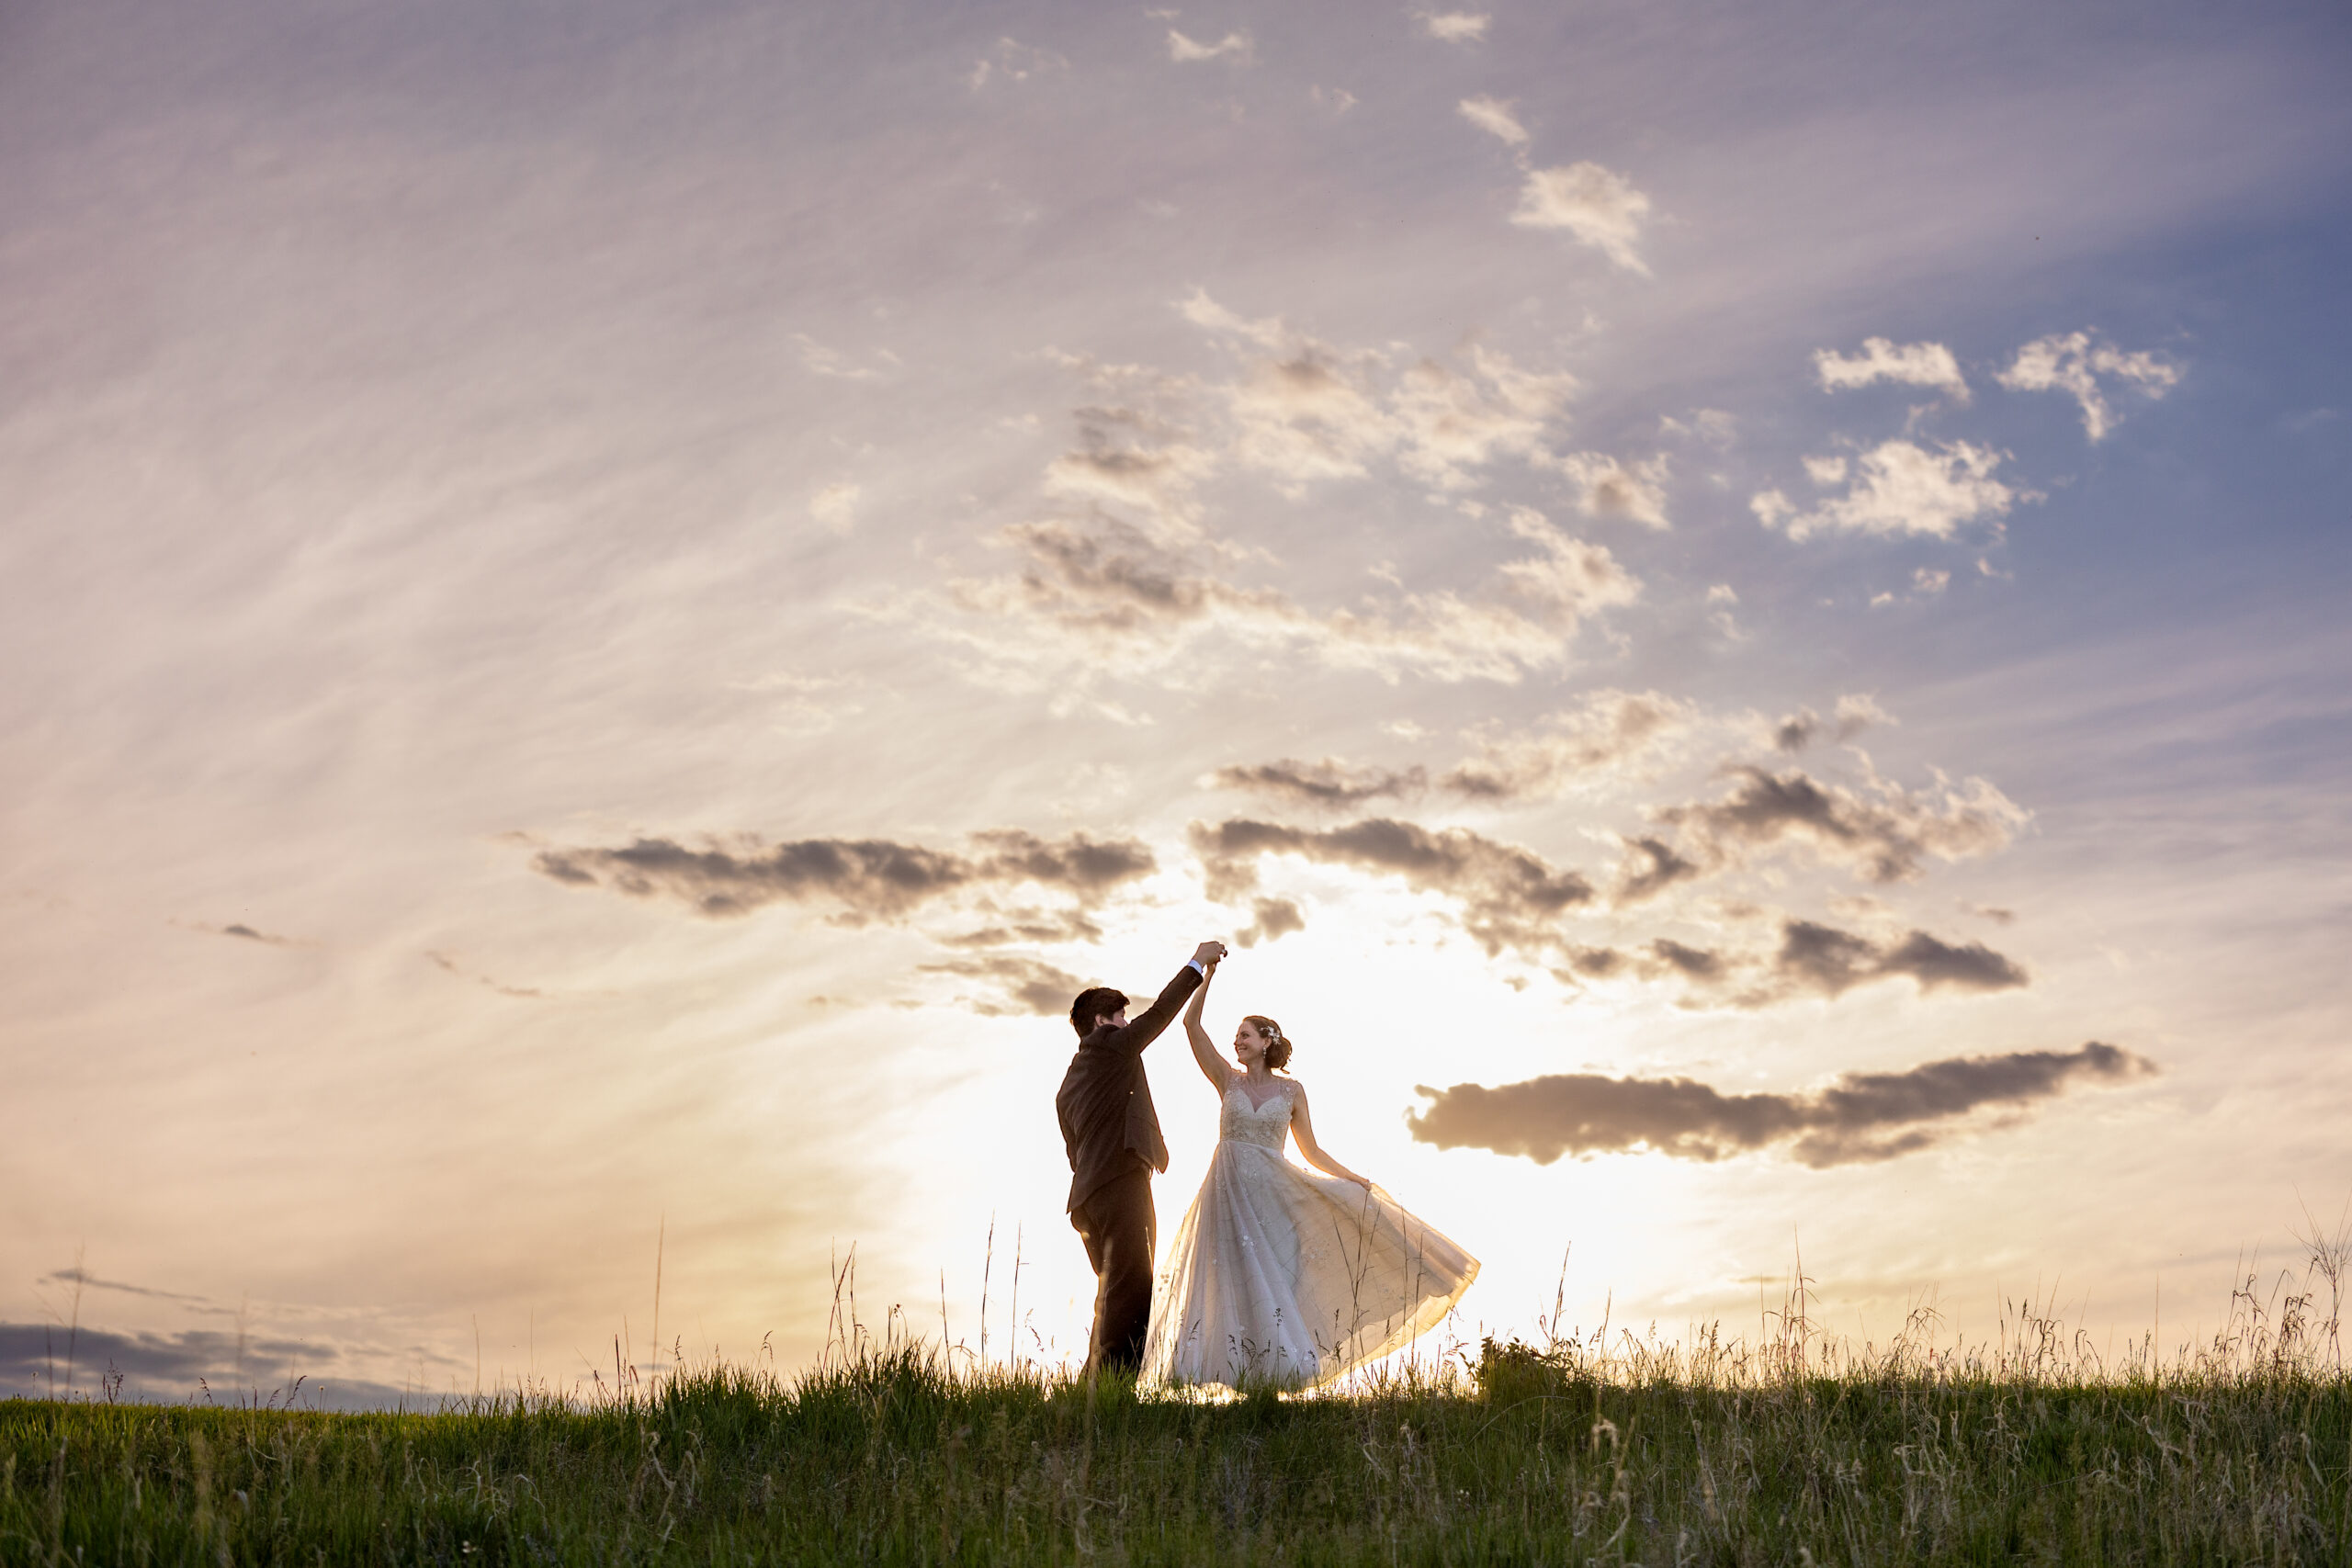 Wedding at Brader County Barn near Hastings Nebraska. Couple is silhouetted against and sunset with clouds